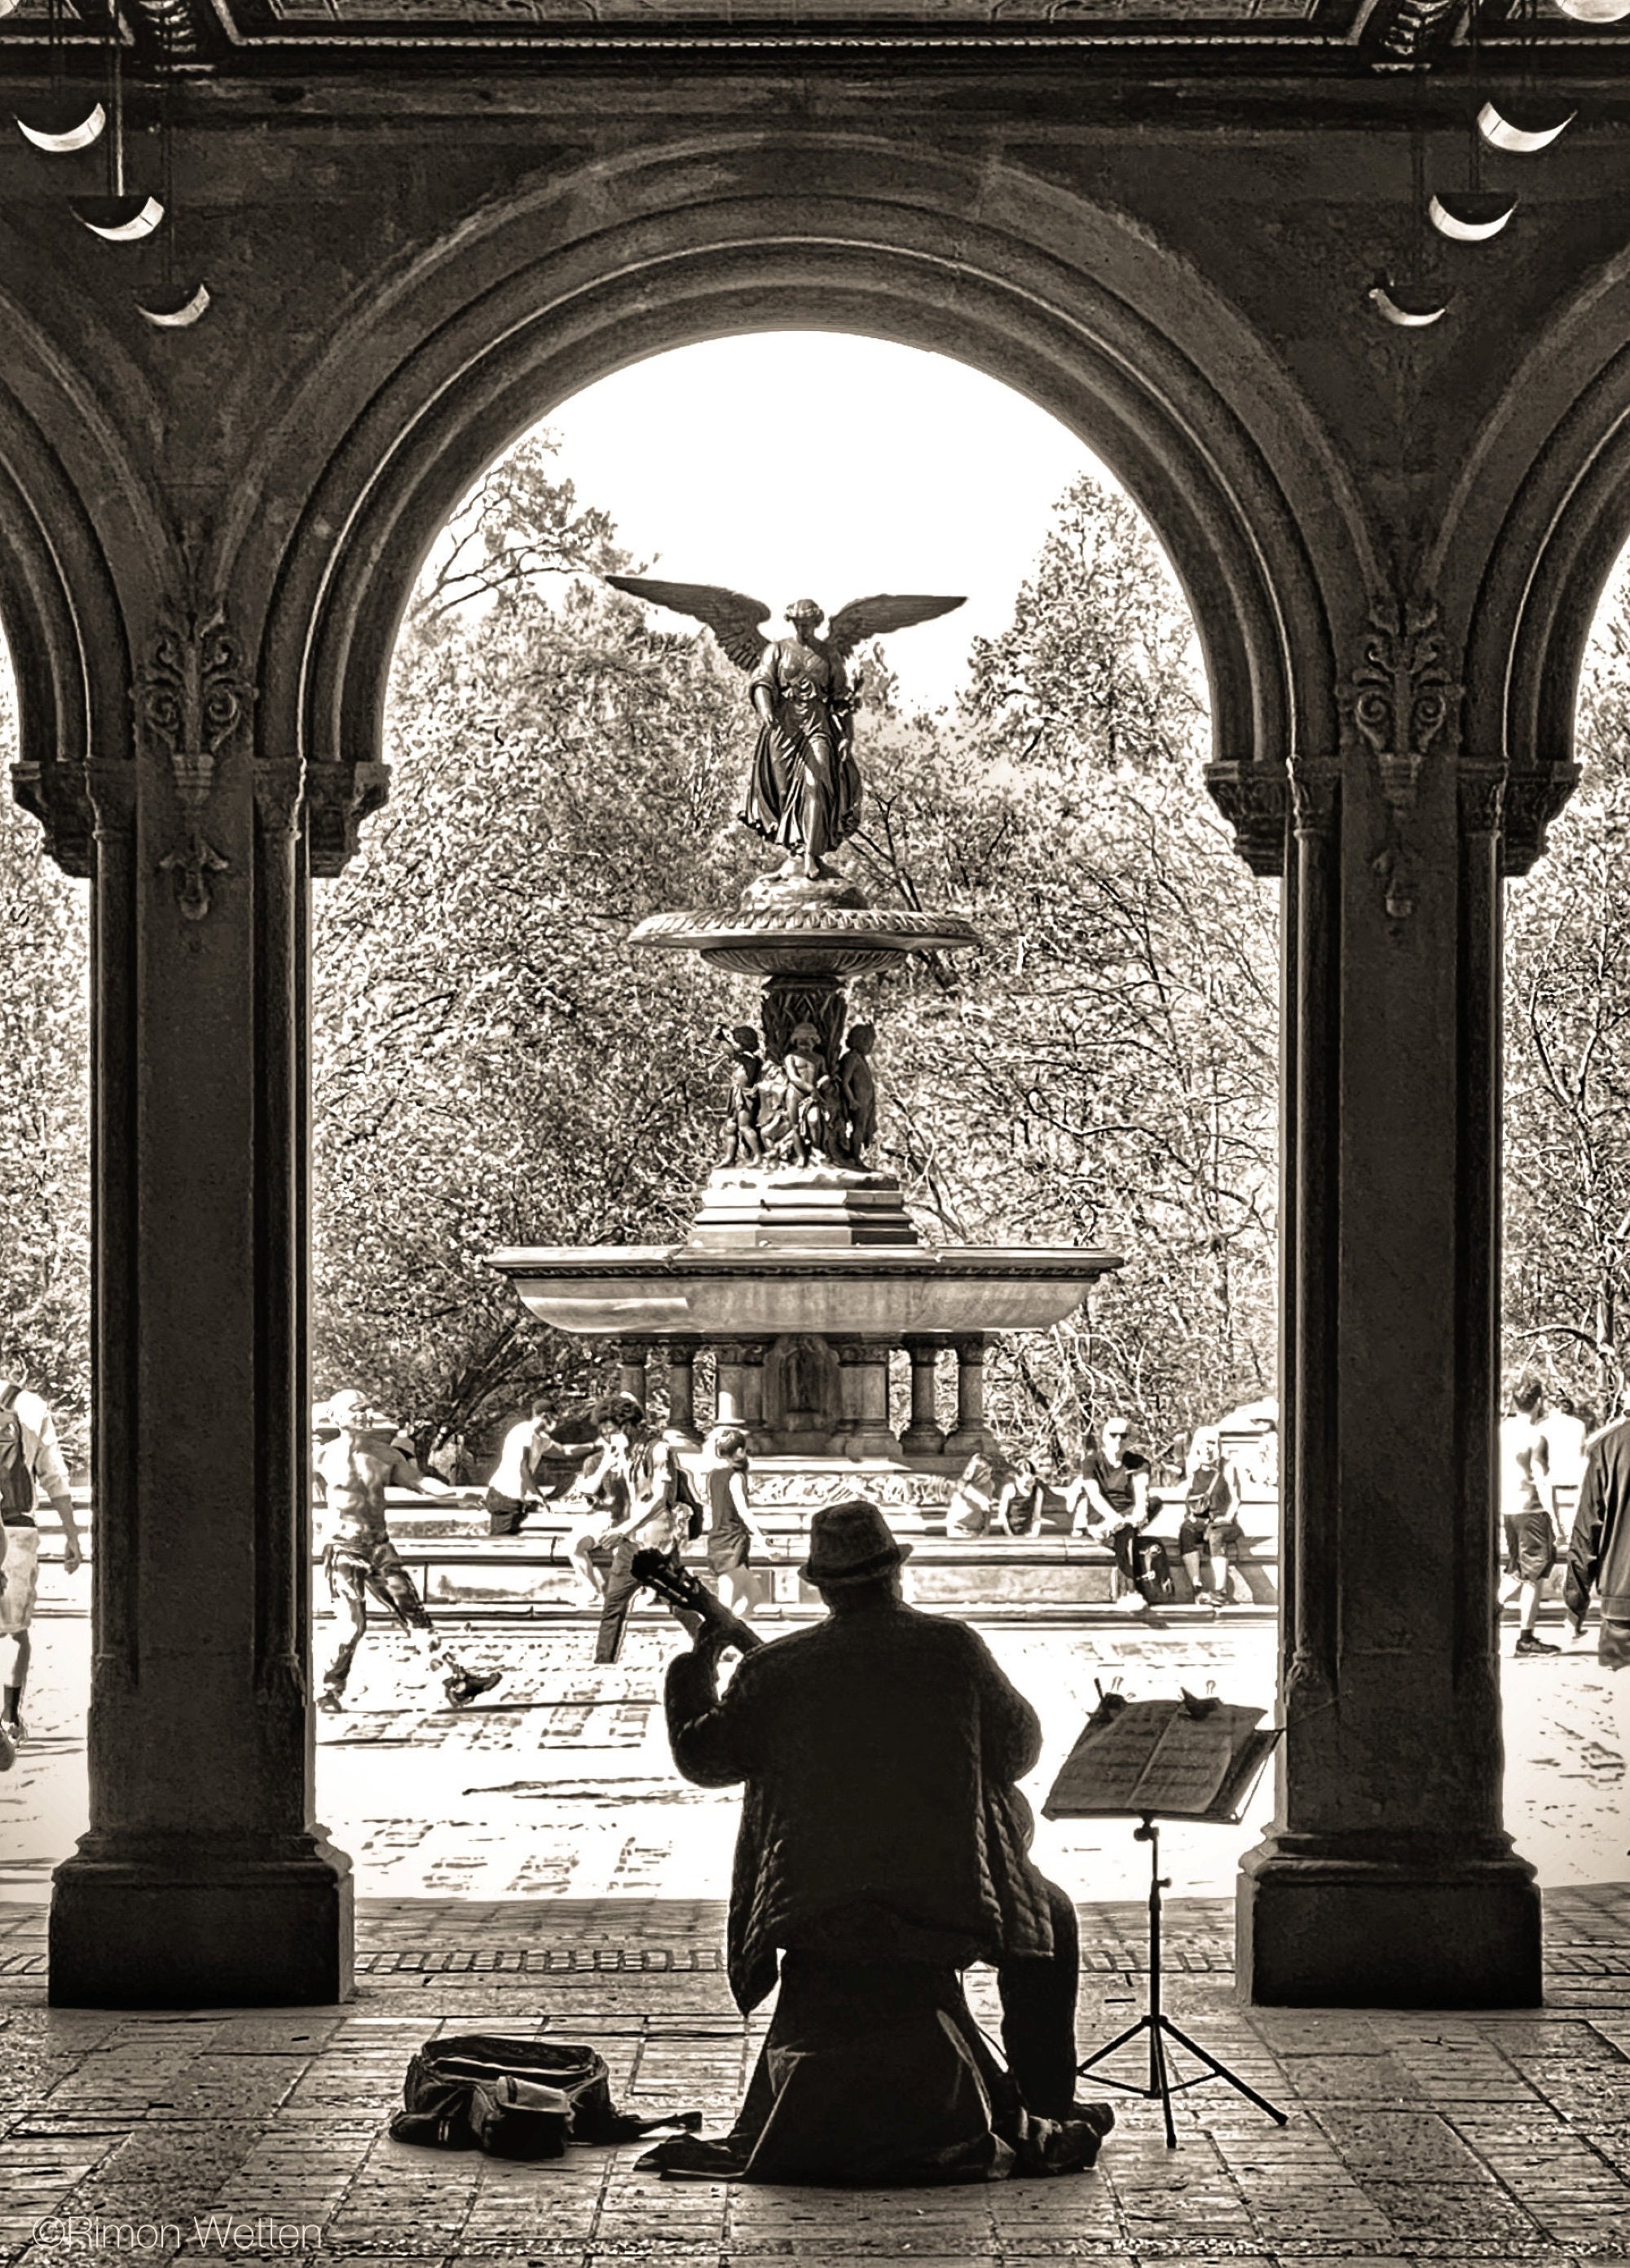 Bethesda Fountain Central Park Morning Fall New York Art Photo Print Poster  Unframed Picture Size 10x8 Inch Paper Size 11x9 Inch Fit Standard Frame